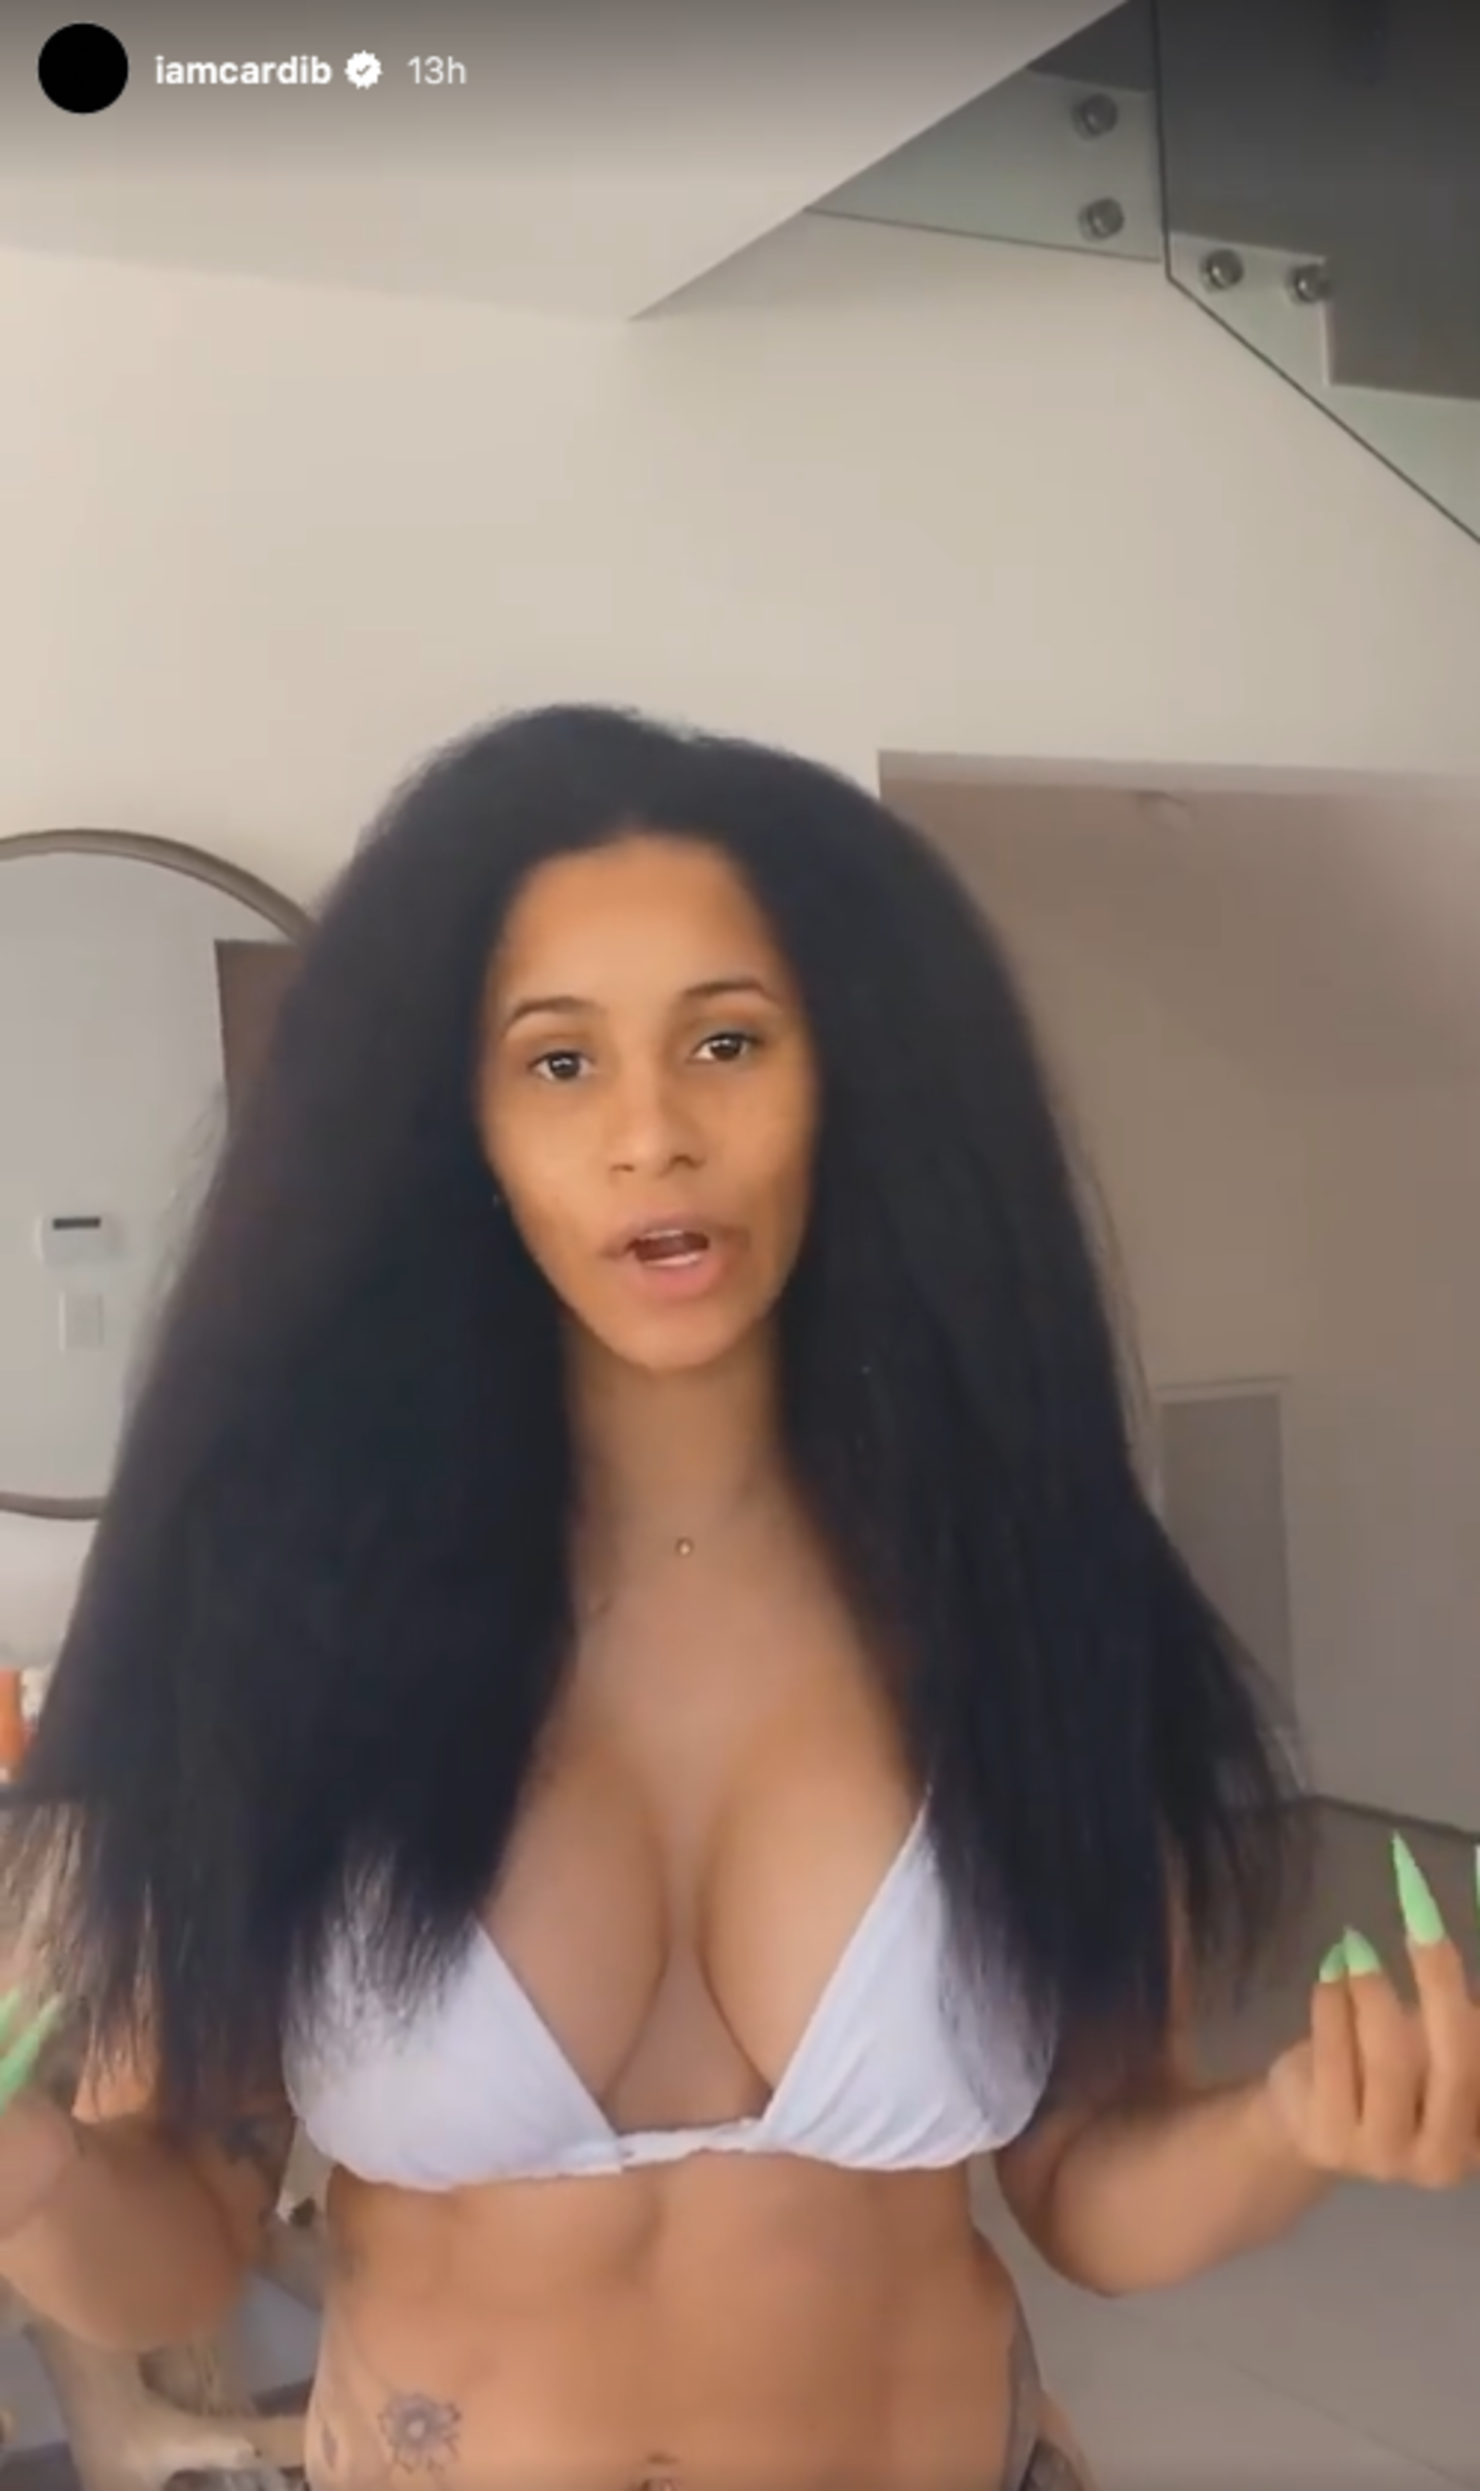 Cardi B Looks Unbelievable Embracing Her Natural Hair Texture: See The Pic  | iHeart